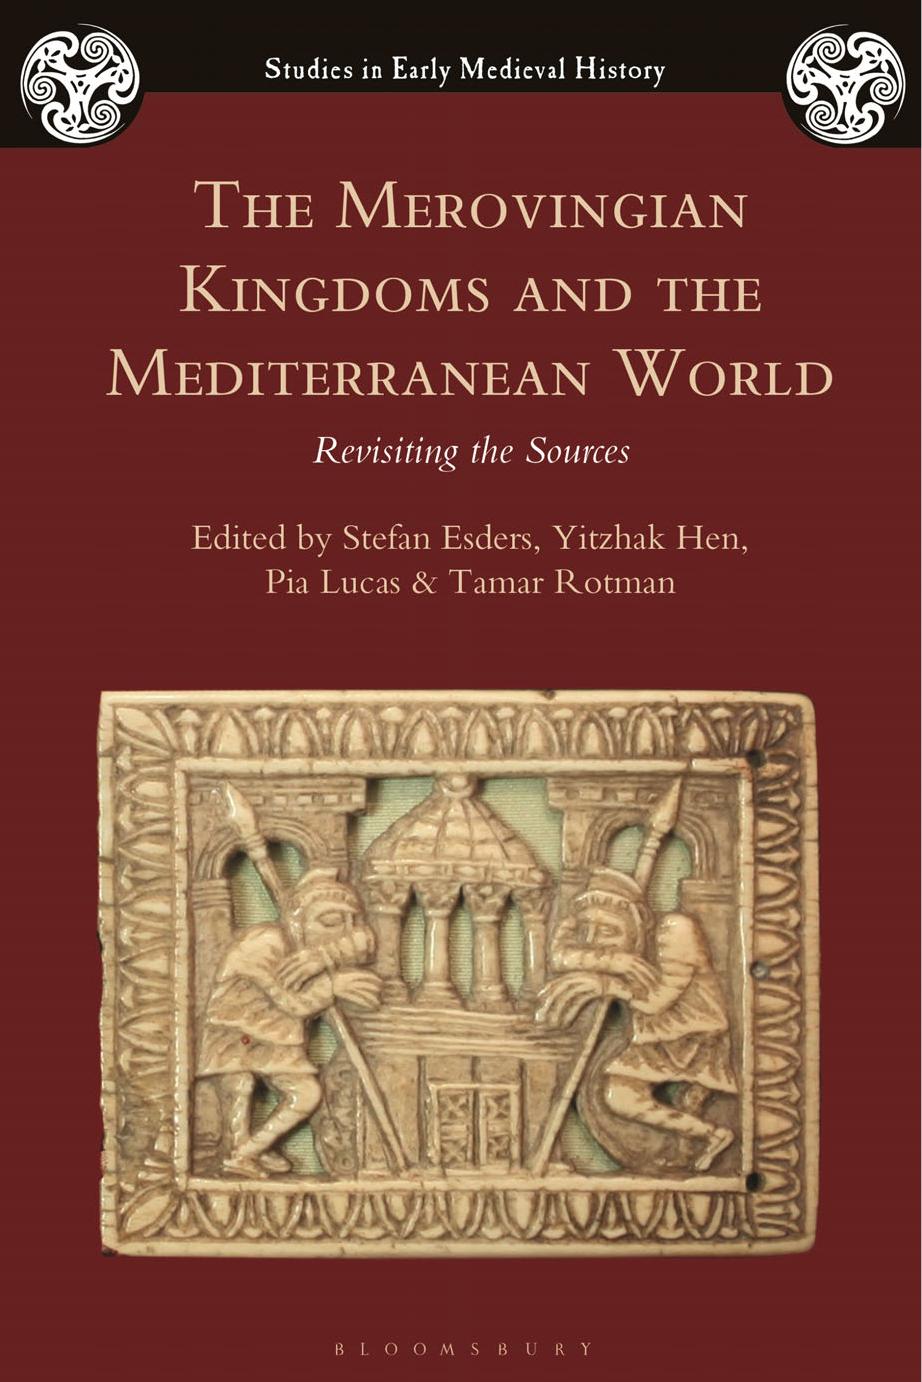 The Merovingian Kingdoms and the Mediterranean World: Revisiting the Sources